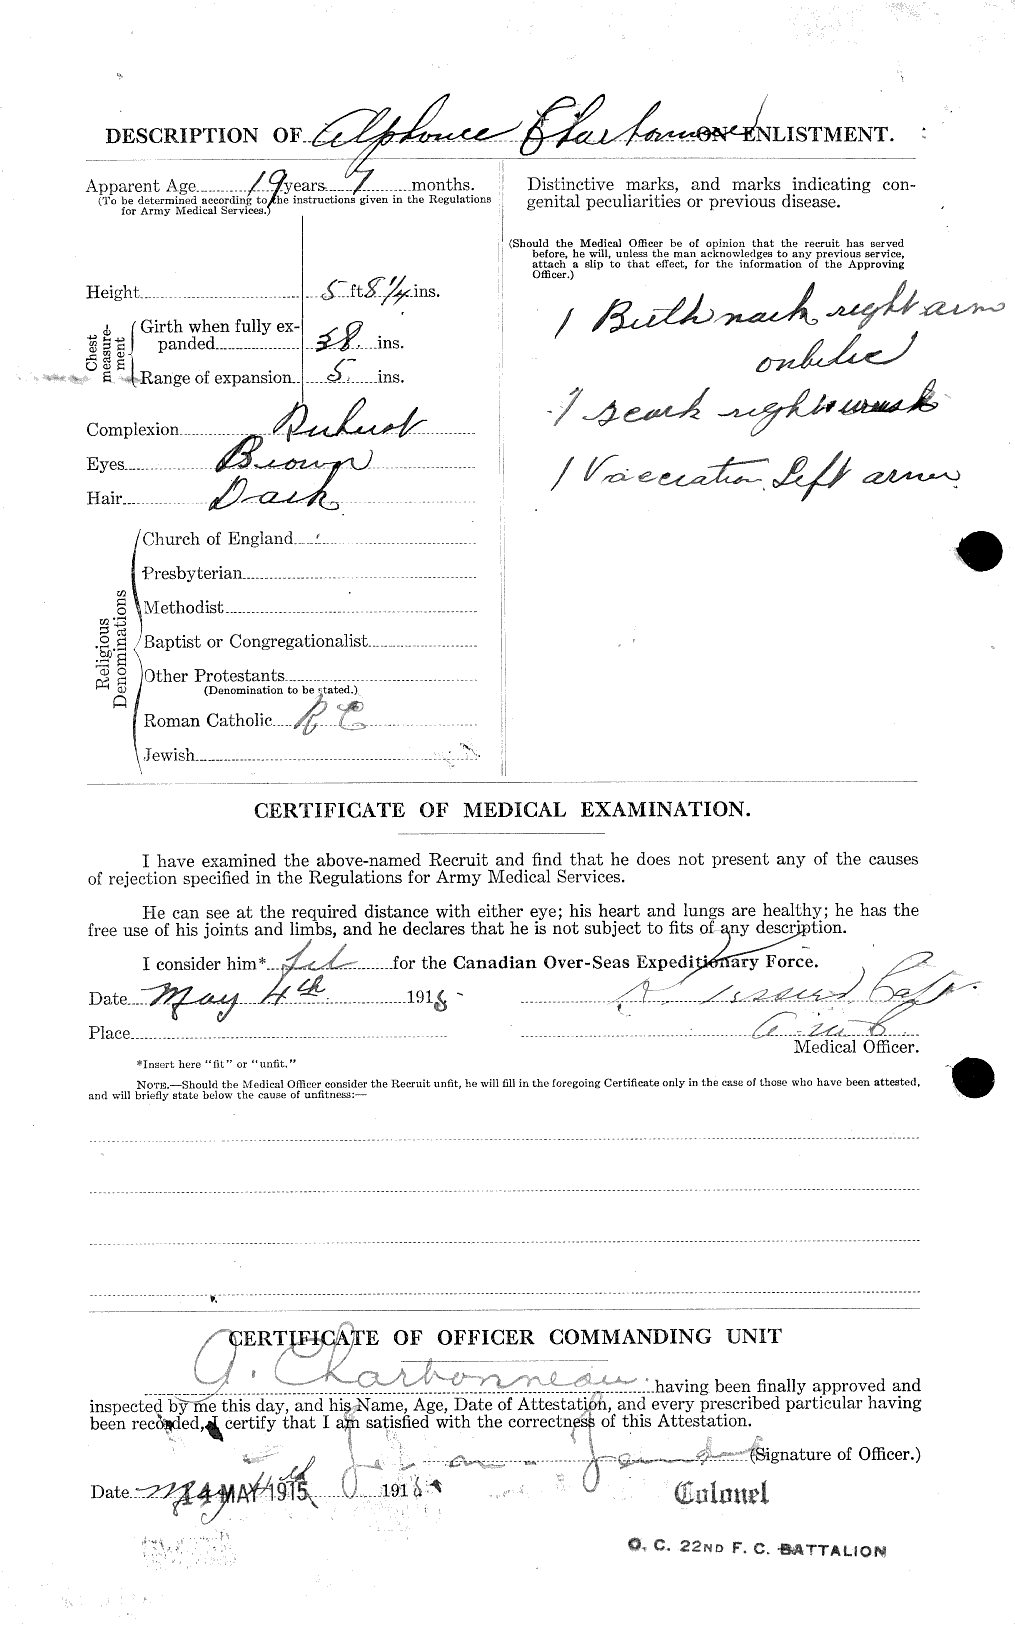 Personnel Records of the First World War - CEF 015120b